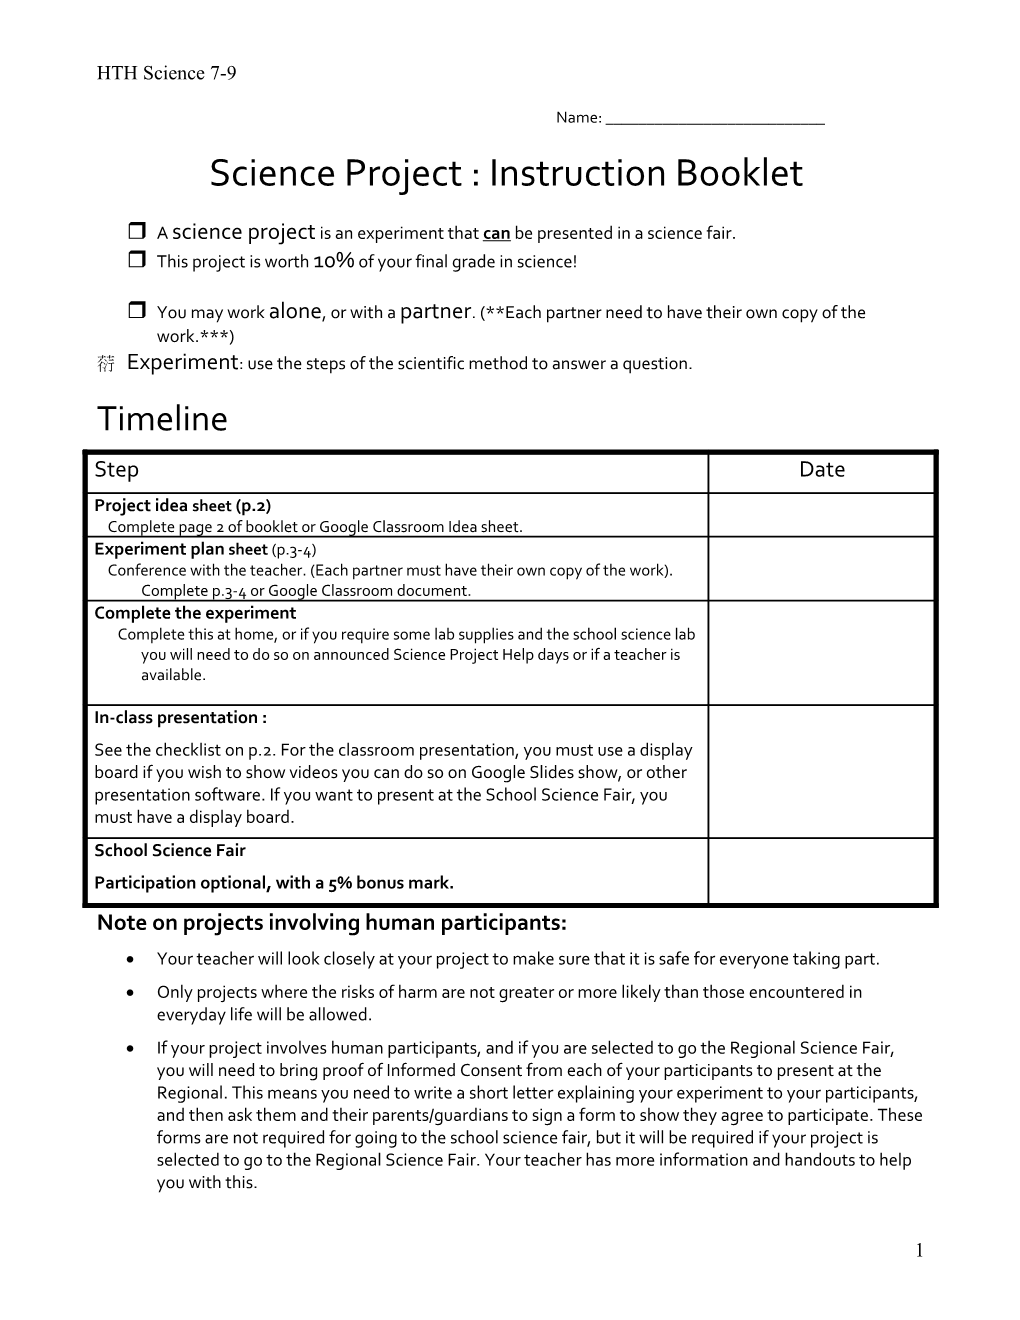 Science Project : Instruction Booklet